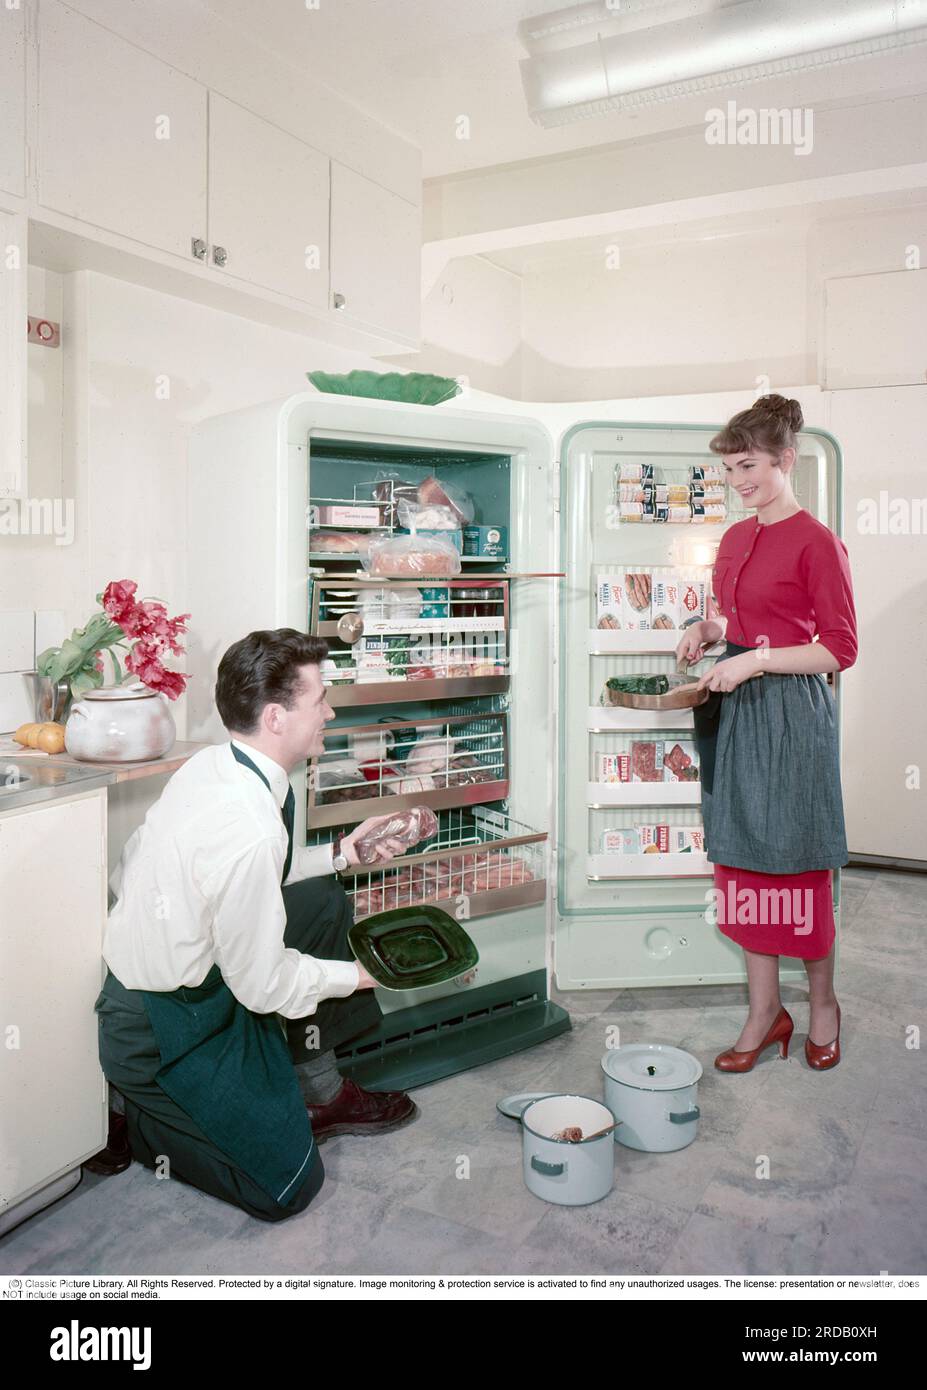 Kitchen from the 1950s. The young Swedish couple in the period kitchen. The door is open to their new freezer where the shelves are filled with frozen goods. Deep-frozen food would be the start of a revolution in household habits and food storage. Many were sceptical, and especially canned food manufacturers considered frozen food to be a passing trend. Sweden 1959. ref BV111-3 Stock Photo